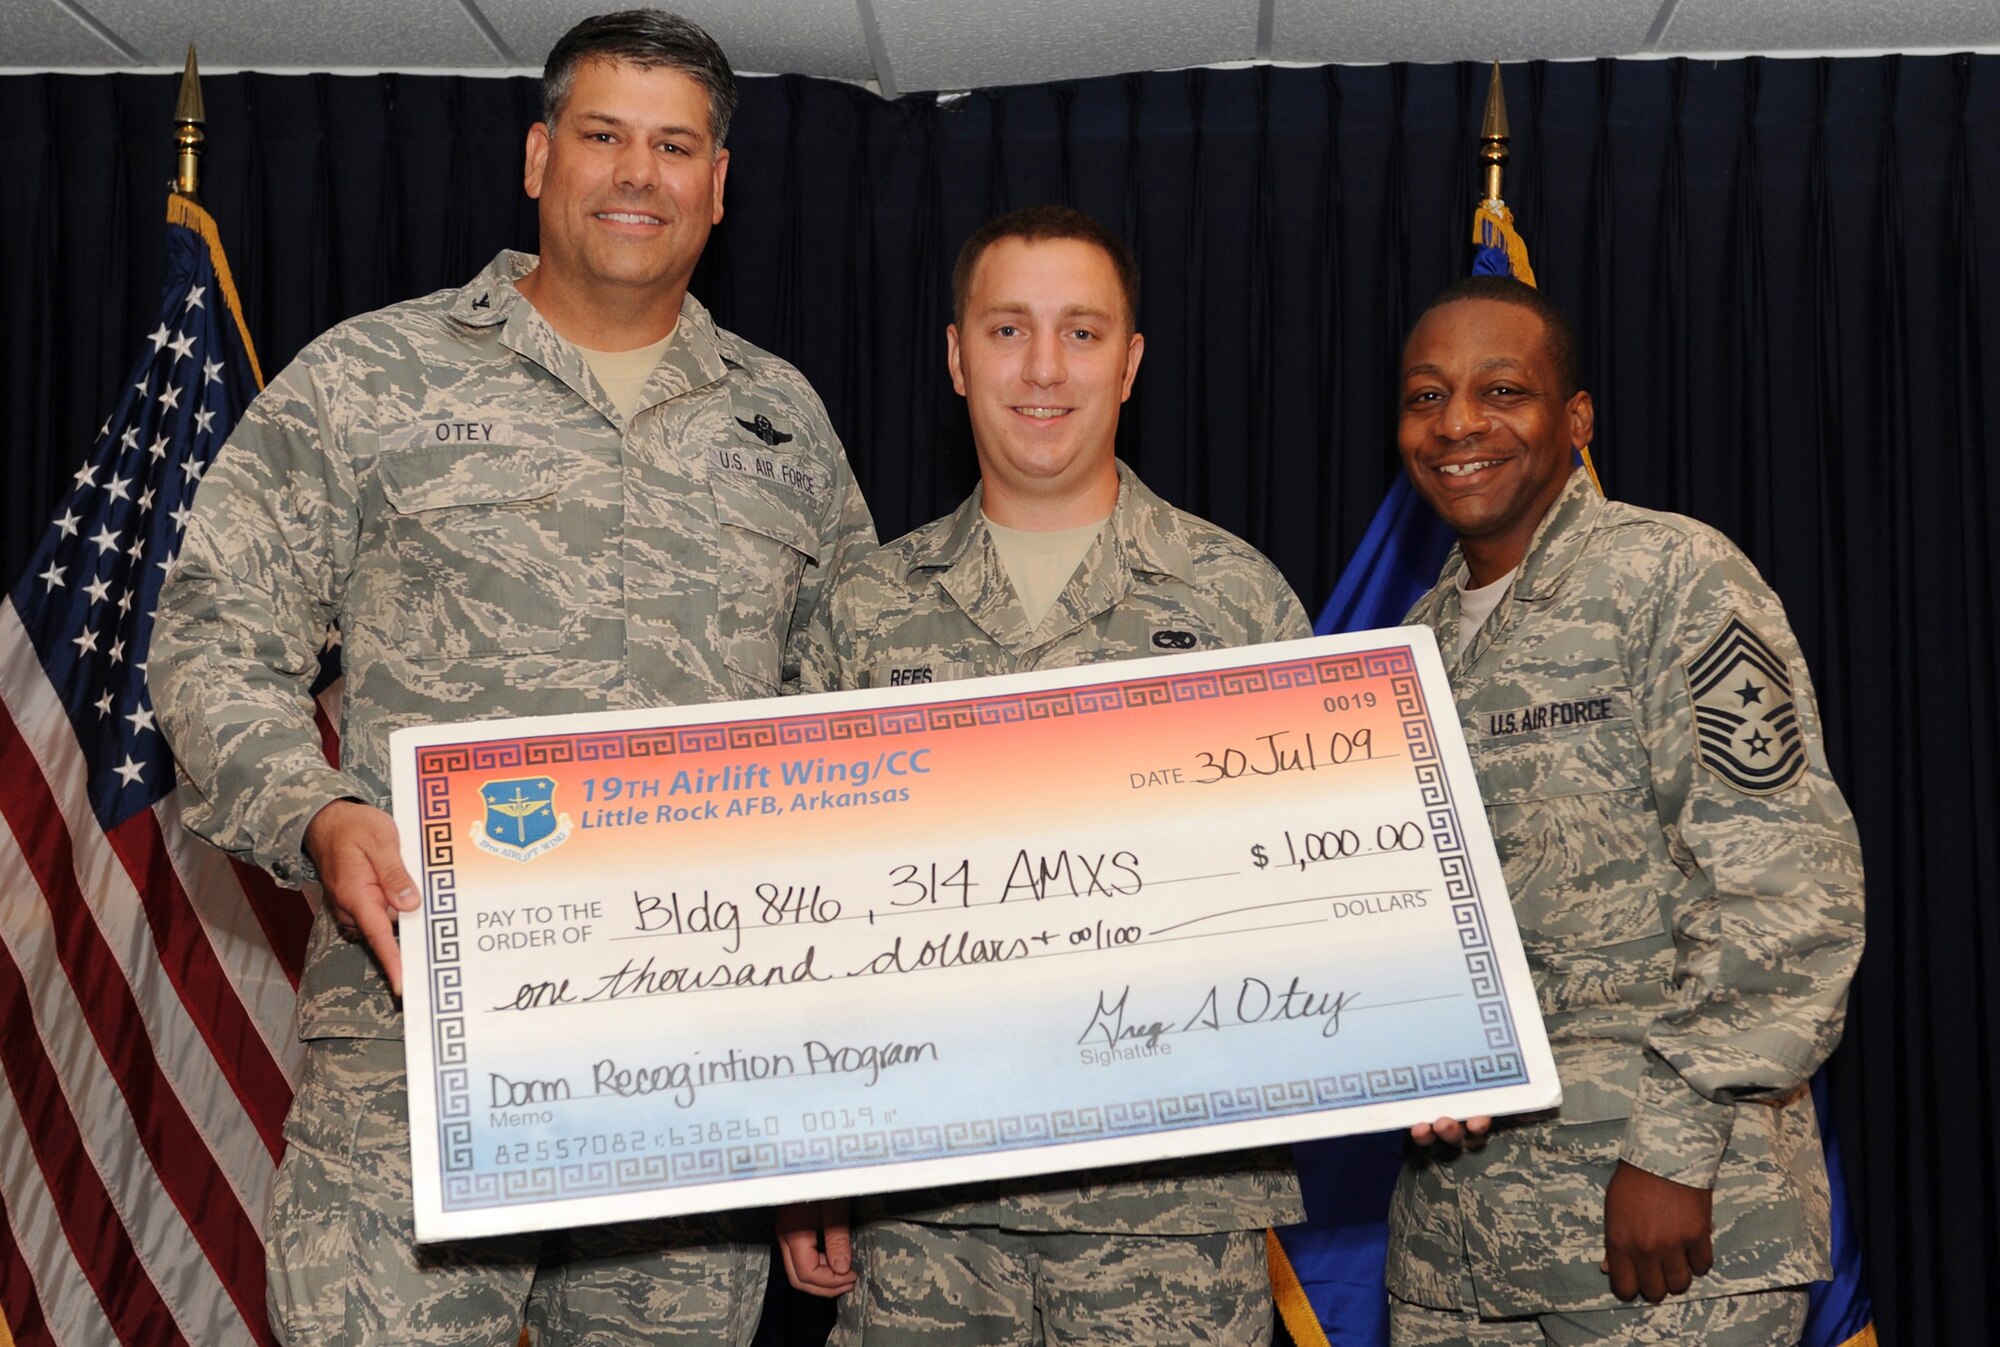 Col. Greg Otey, 19th Airlift Wing commander, and Chief Master Sgt. Anthony Brinkley, 19th Airlift Wing command chief, presents Senior Airman Joshua Rees, 314th Maintenance Squadron, a check for have an outstanding dorm  building at Little Rock Air Force Base, Ark. July 30. The money will go towards the entire dorm building. (U. S. Air Force photo by Senior Airman Jim Araos)